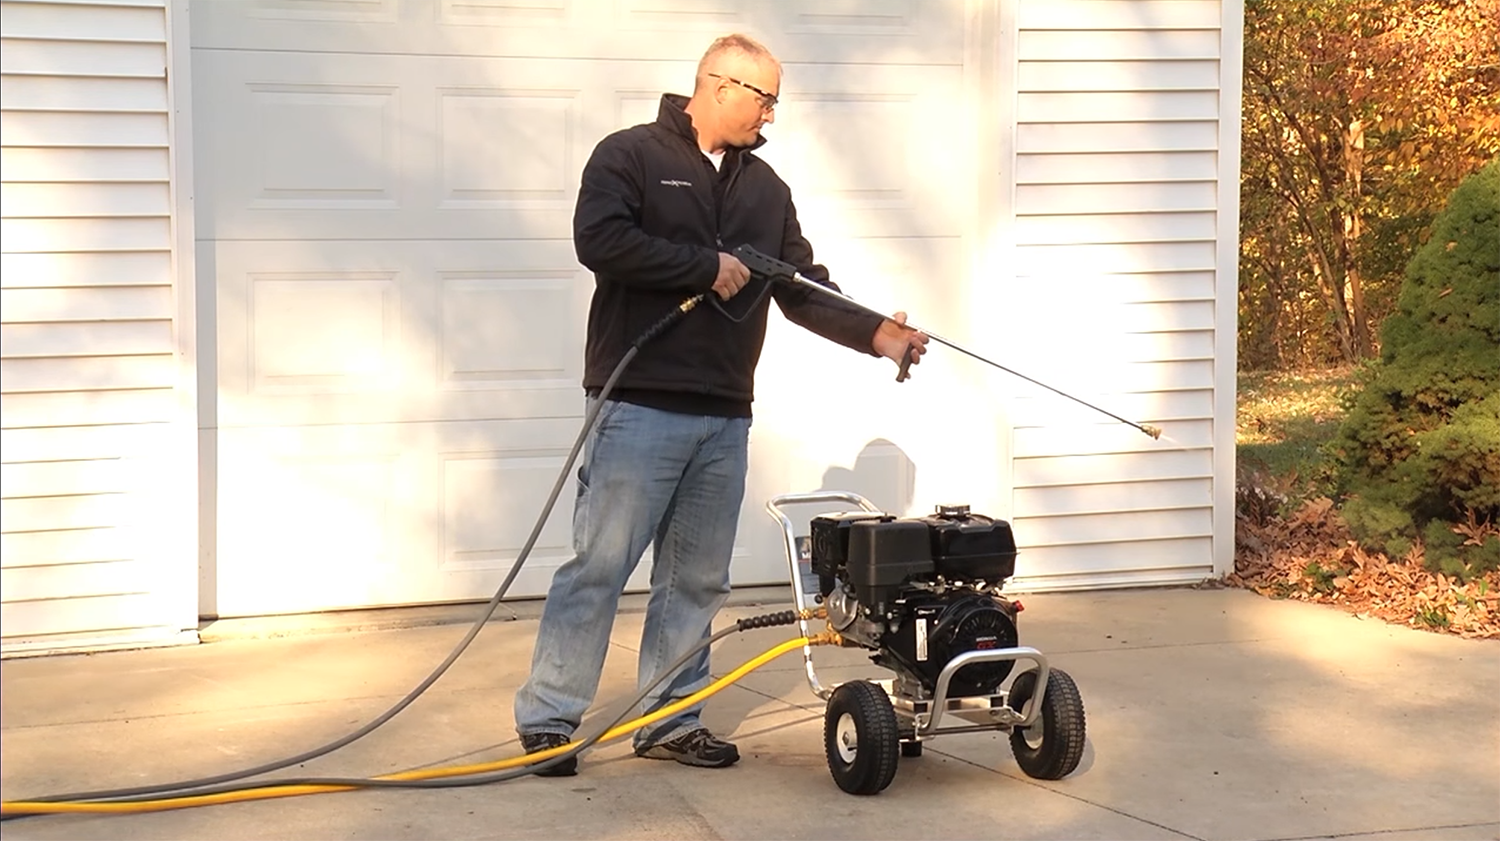 How To Start A Pressure Washer That Has Been Sitting How to Use a Pressure Washer | Starting a Gas Pressure Washer